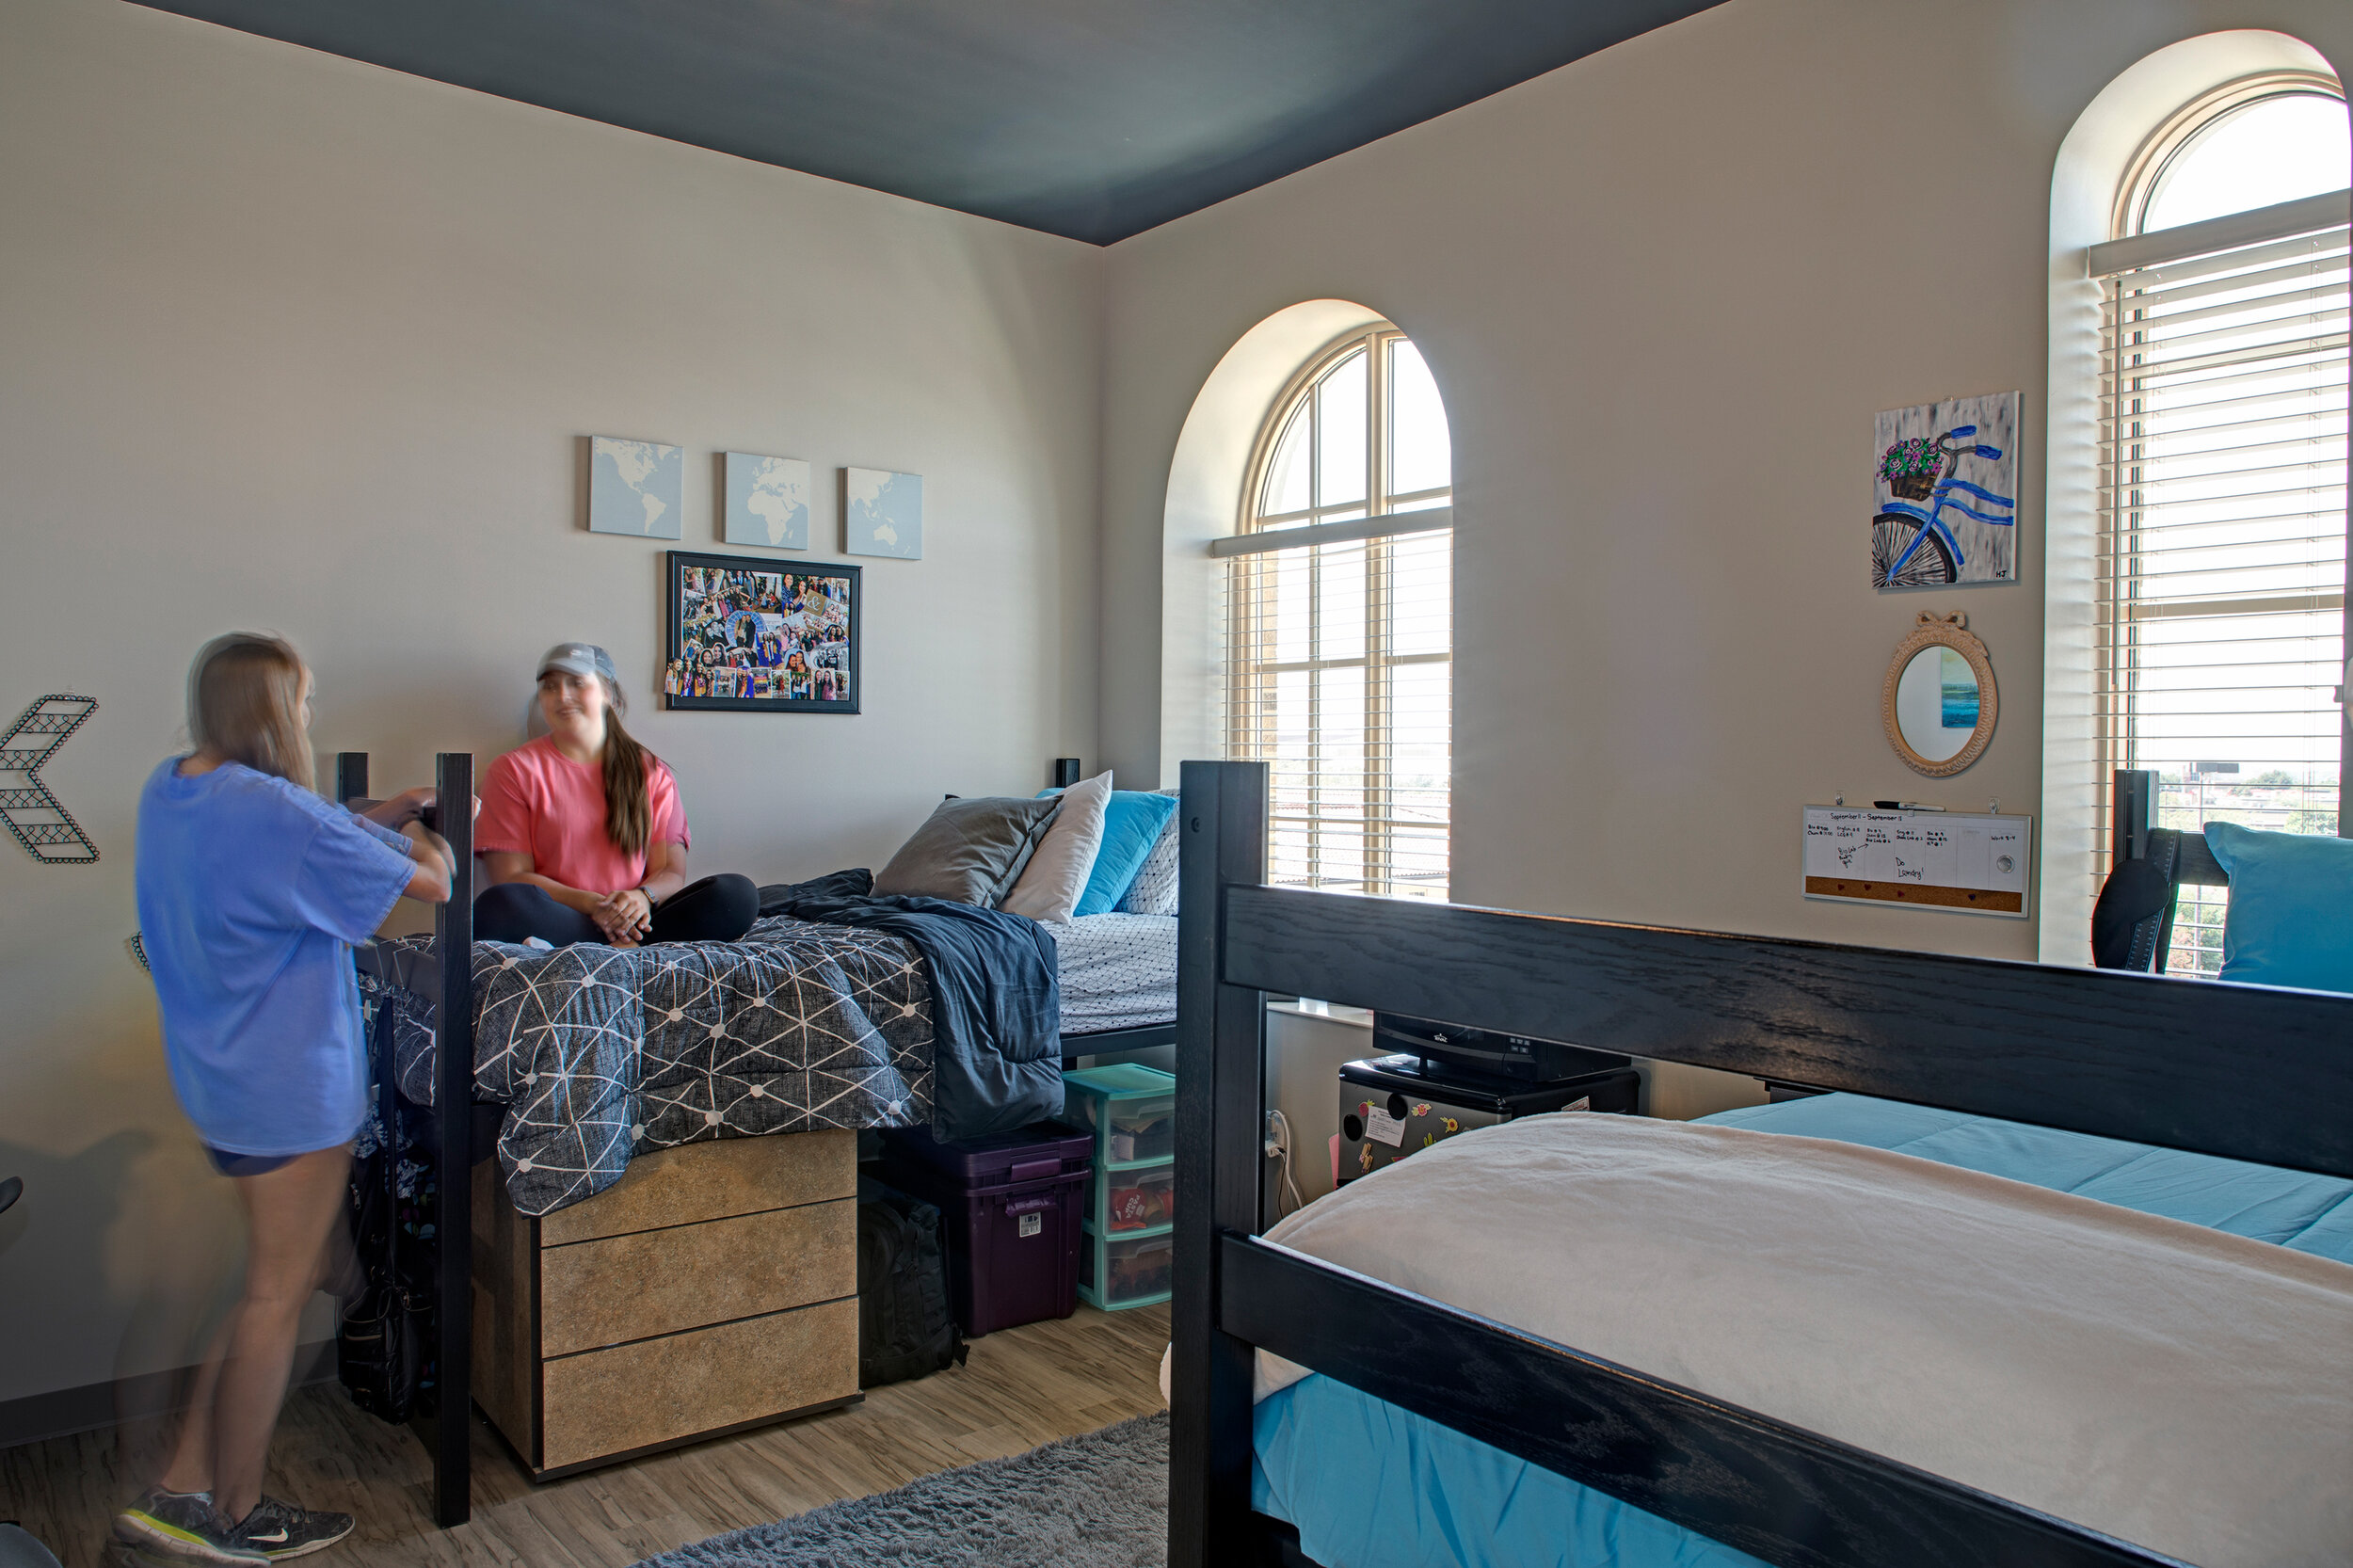 Considerations for Residence Halls